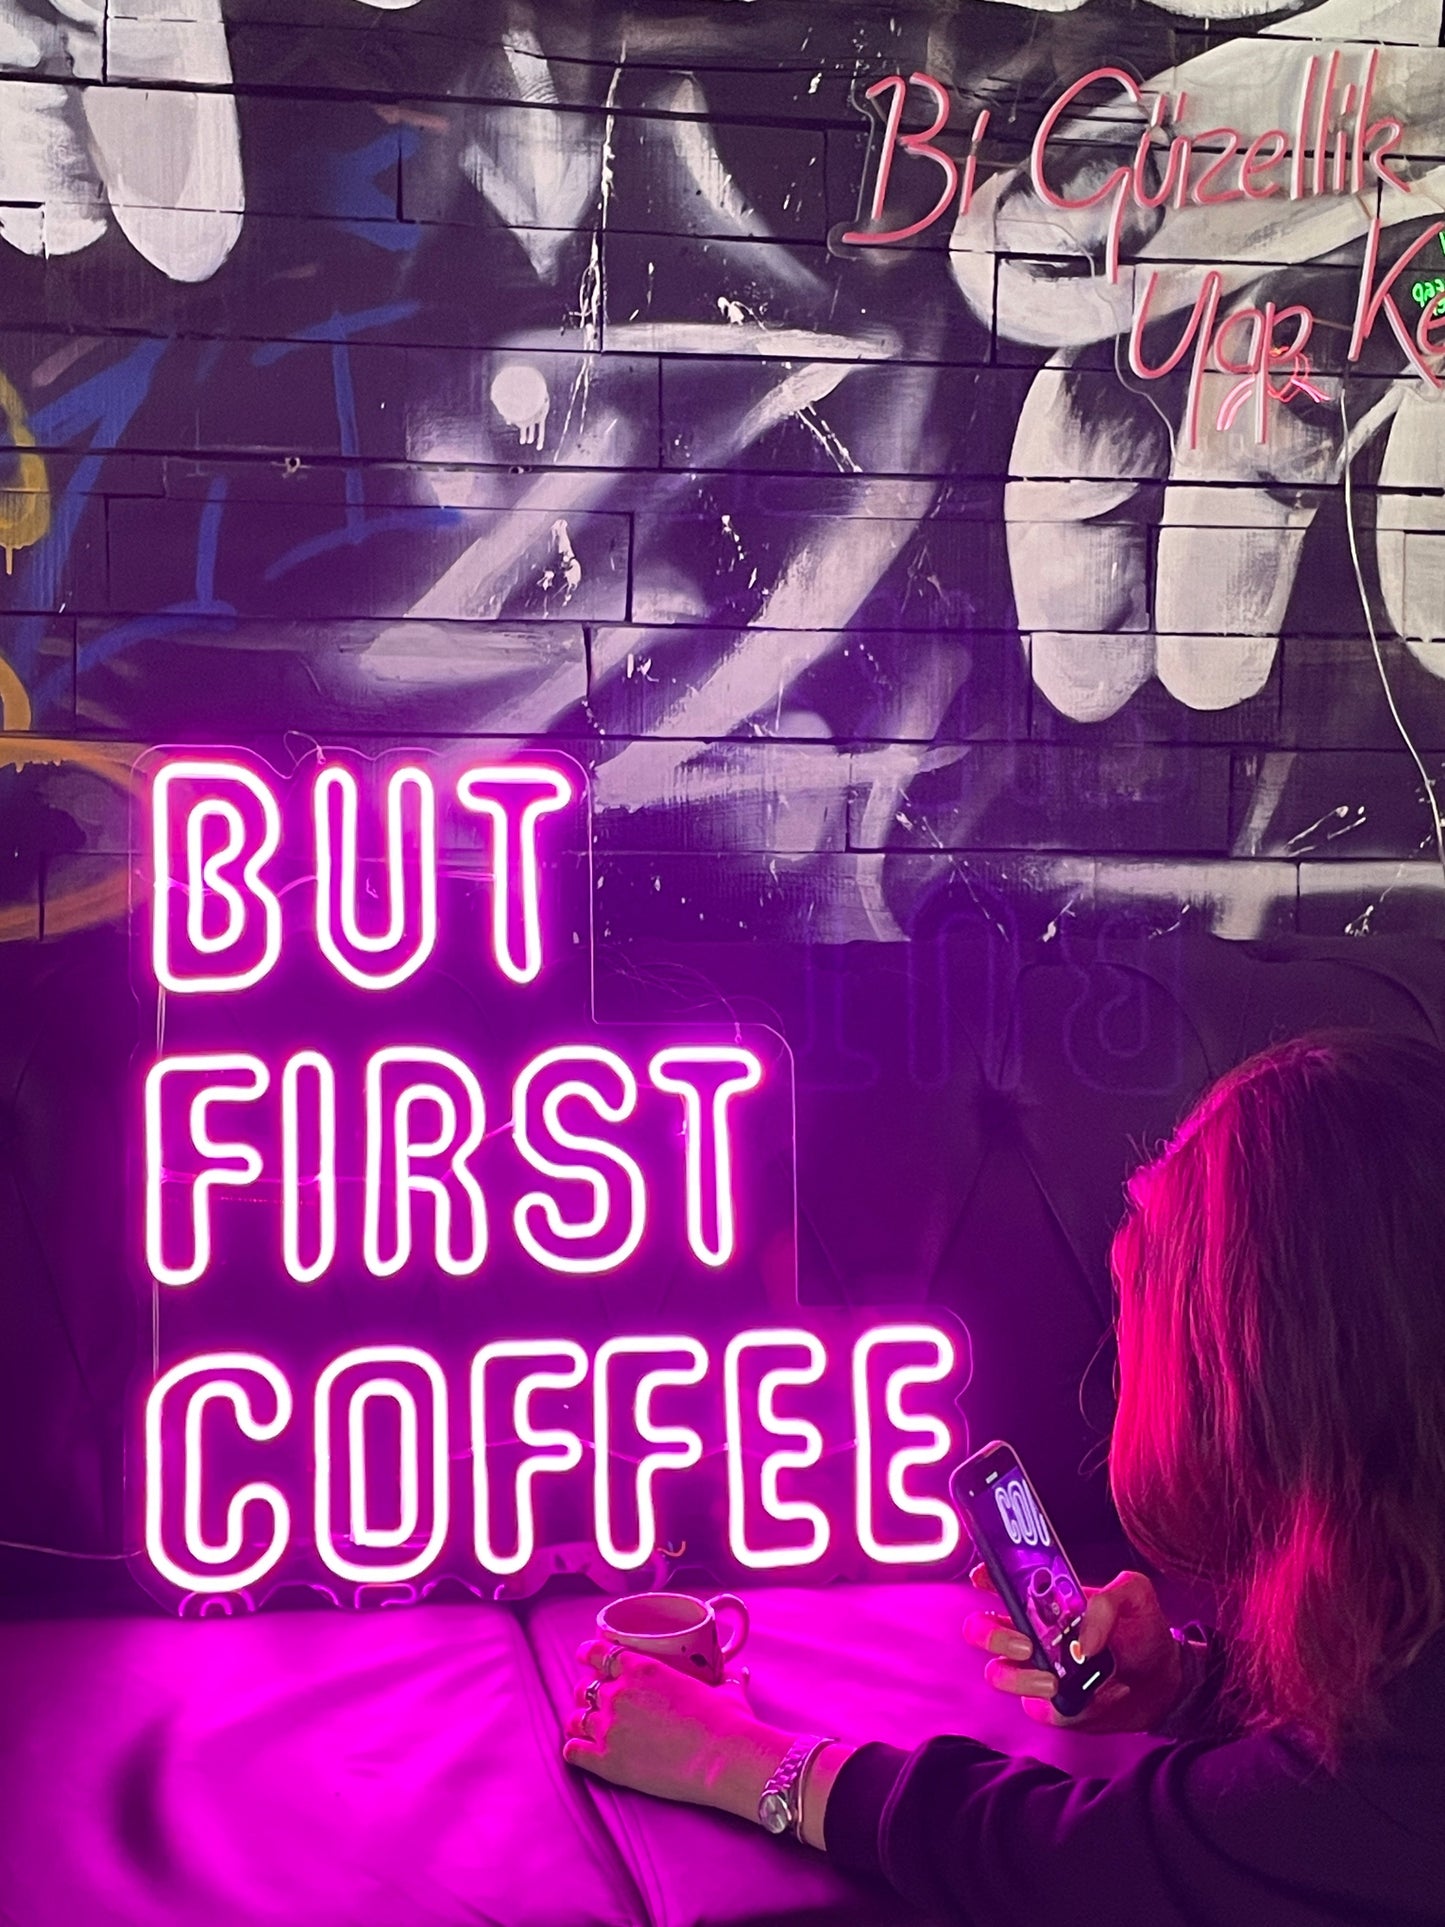 But First, Coffee Neon Sign